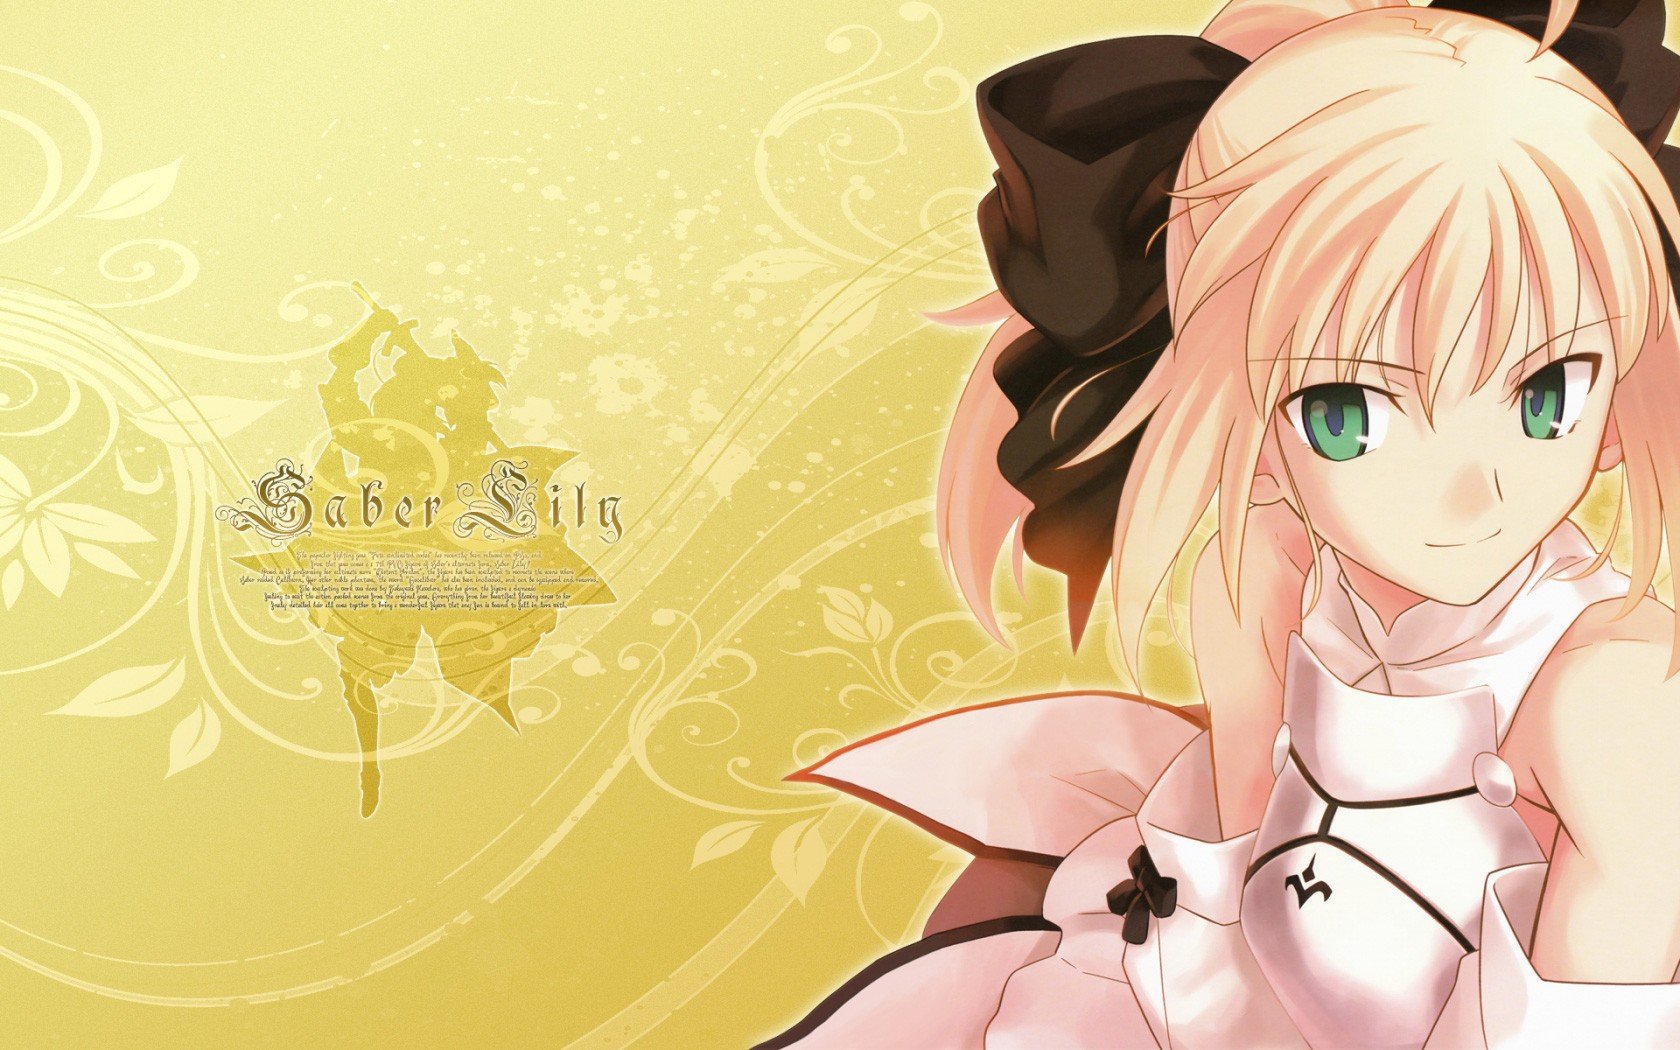 Saber, Fate Unlimited Codes, Fate Series, Saber Lily, Blonde, Green eyes Wallpaper